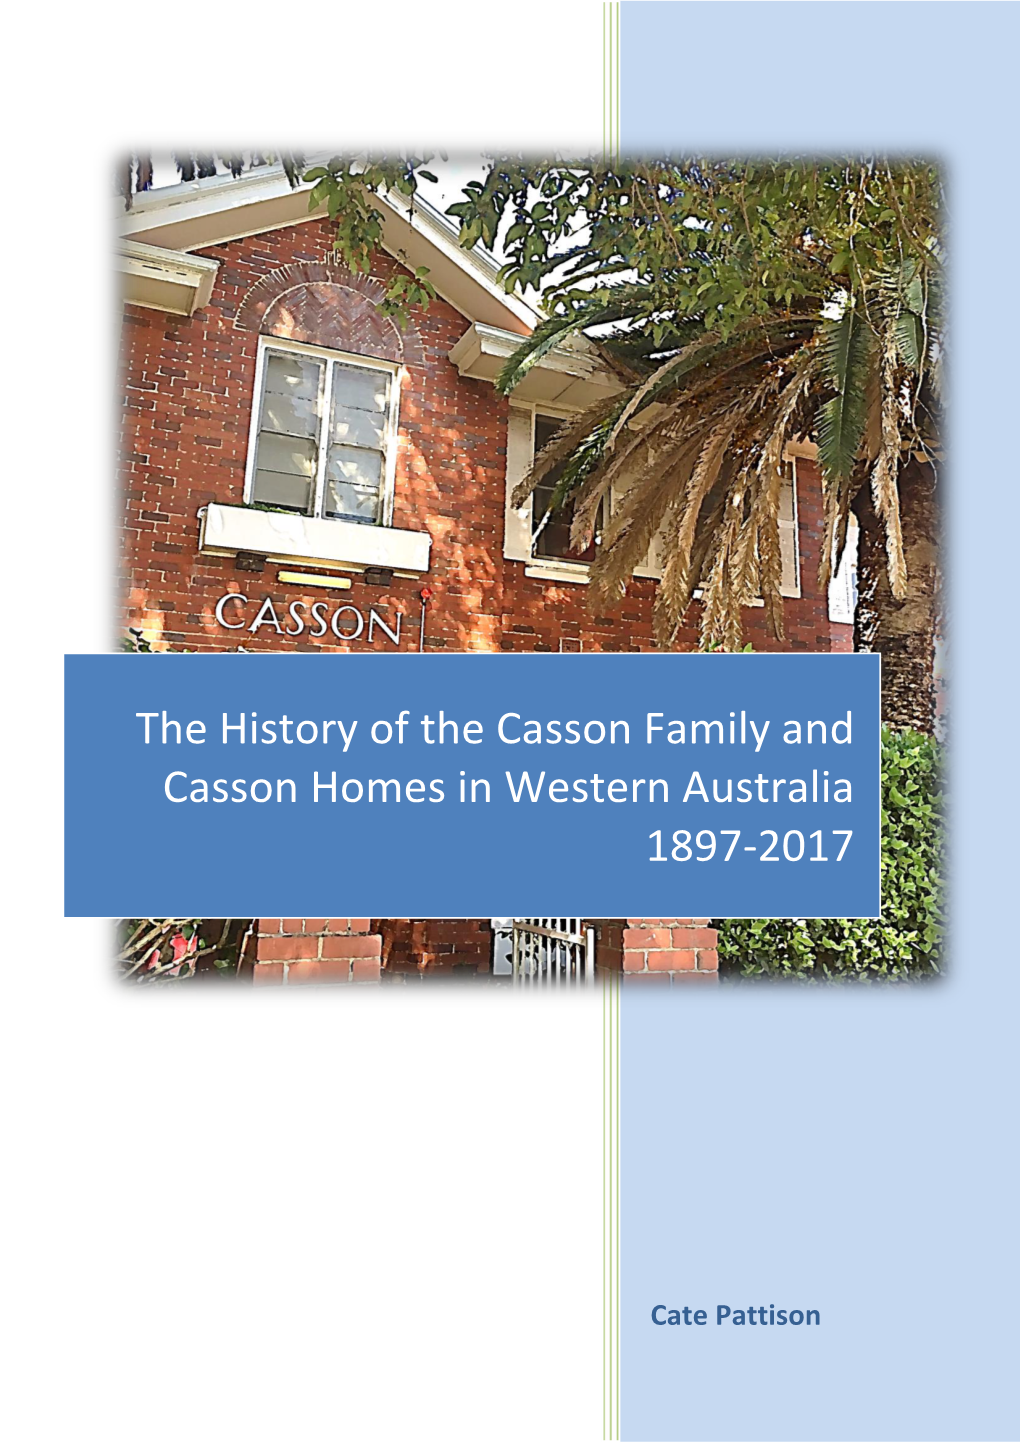 Casson Homes Incorporated 1922-2018 by Cate Pattison